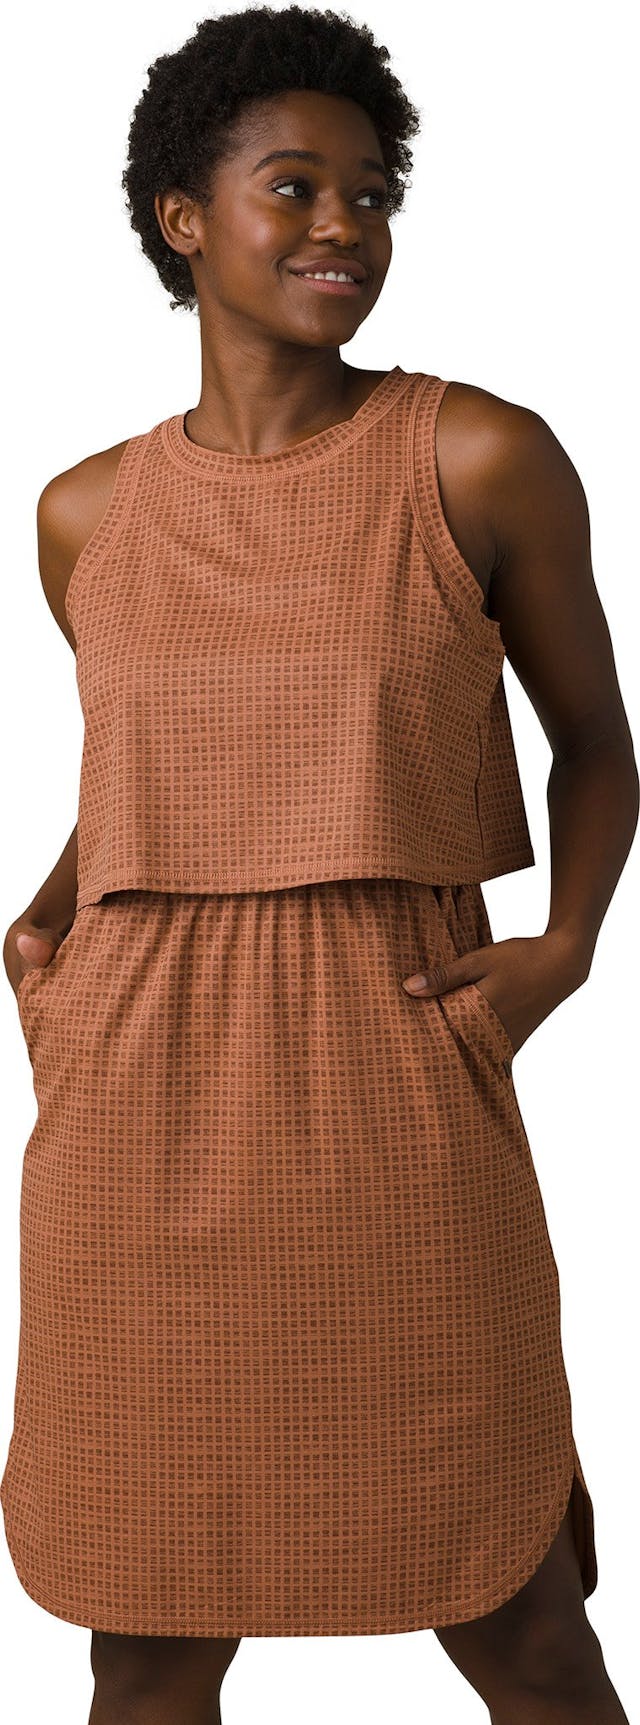 Product image for Railay Dress - Women's